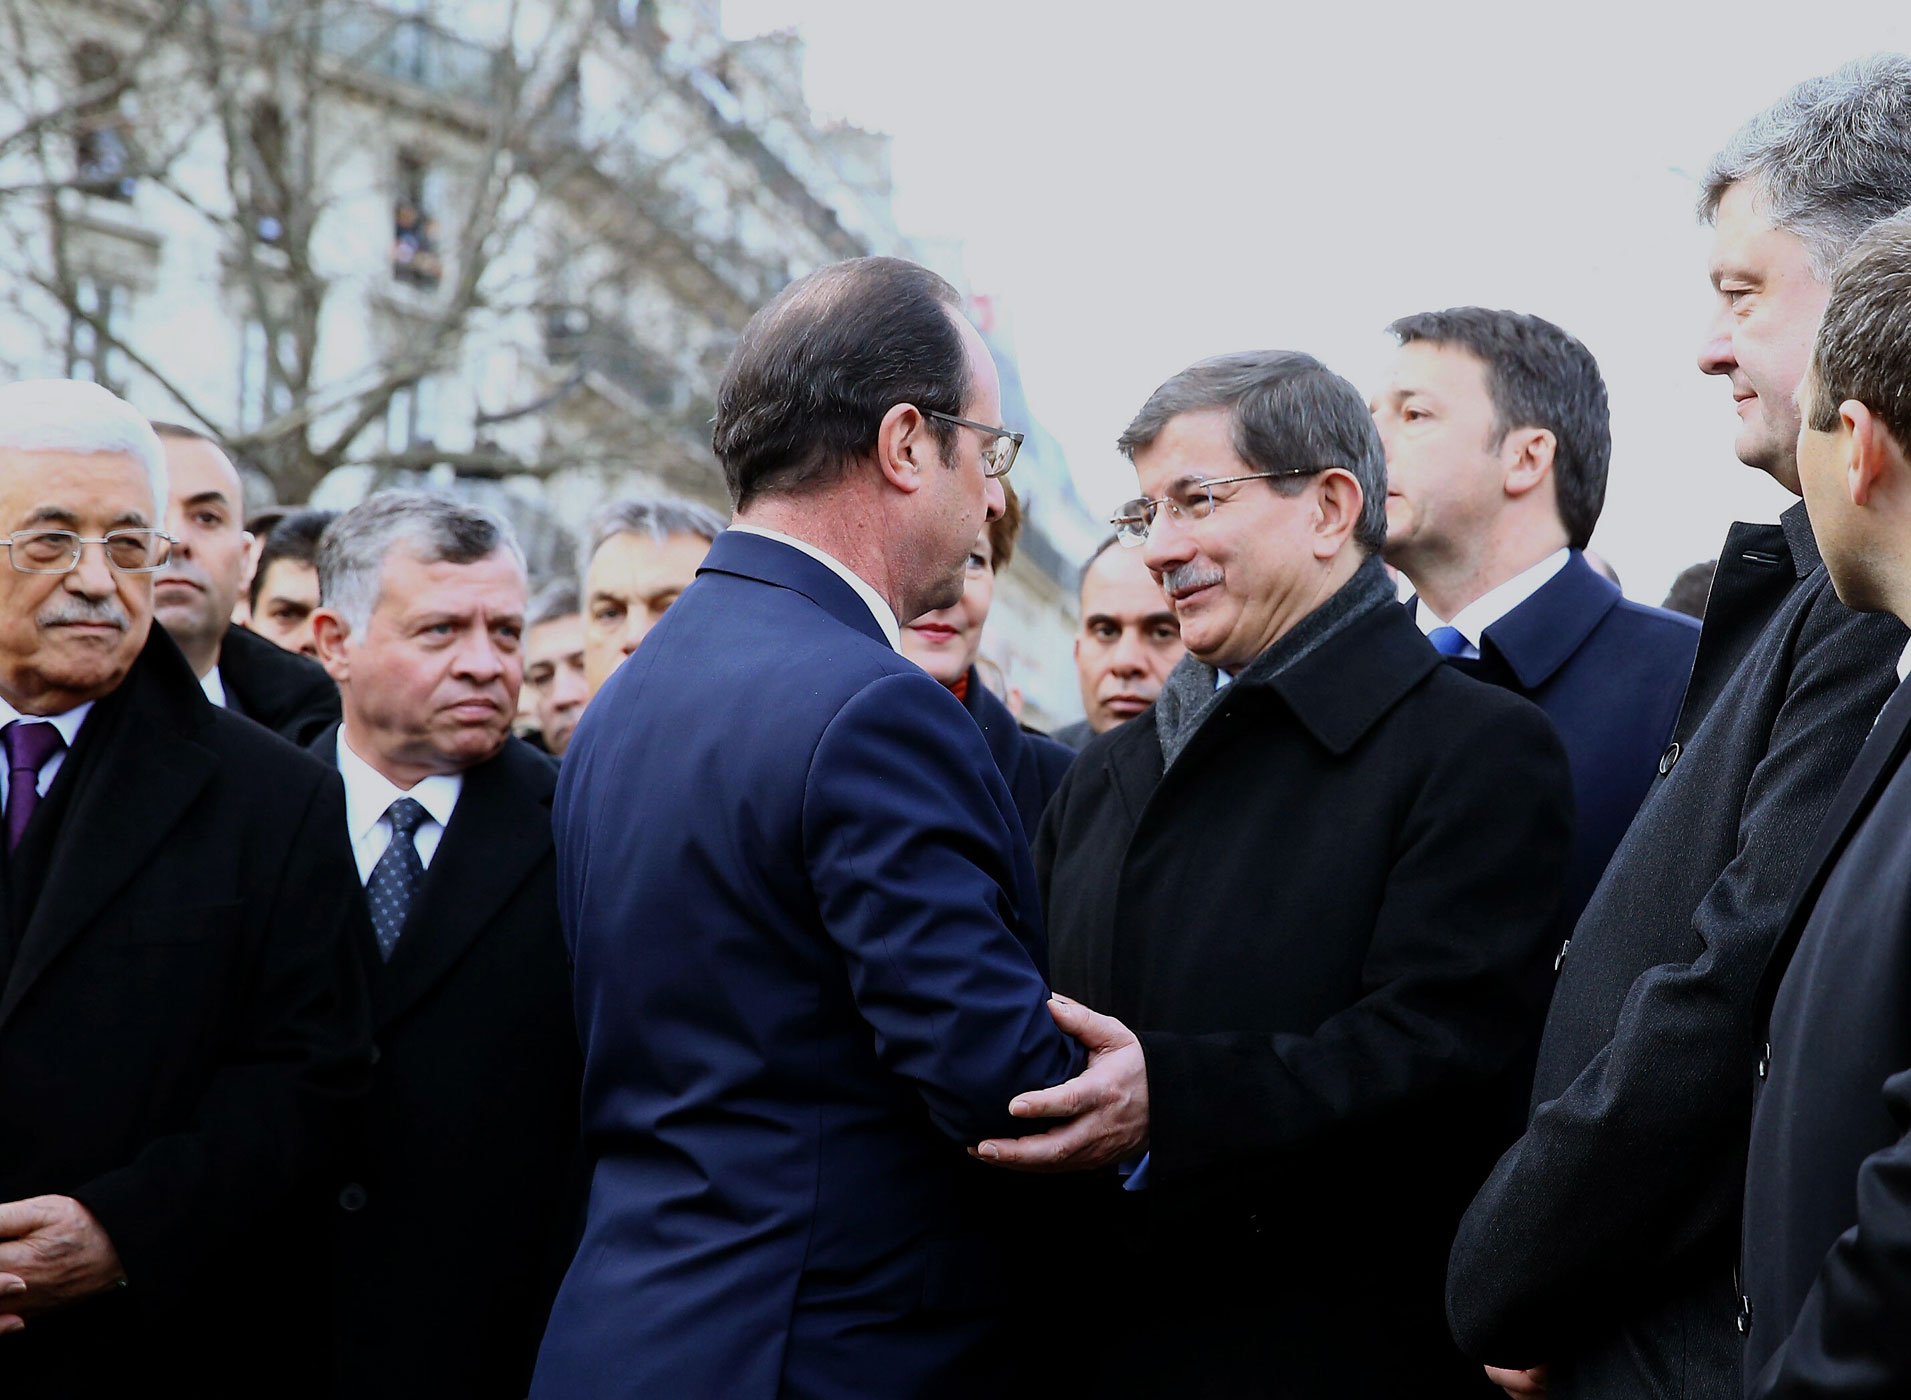 Turkish Prime Minister Ahmet Davutoglu, center right, talks to French President Francois Hollande, center left, during the Unity March 'Marche Republicaine' in Paris, France on Jan. 11, 2014. (Hakan Goktepe—Anadolu Agency/Getty Images)